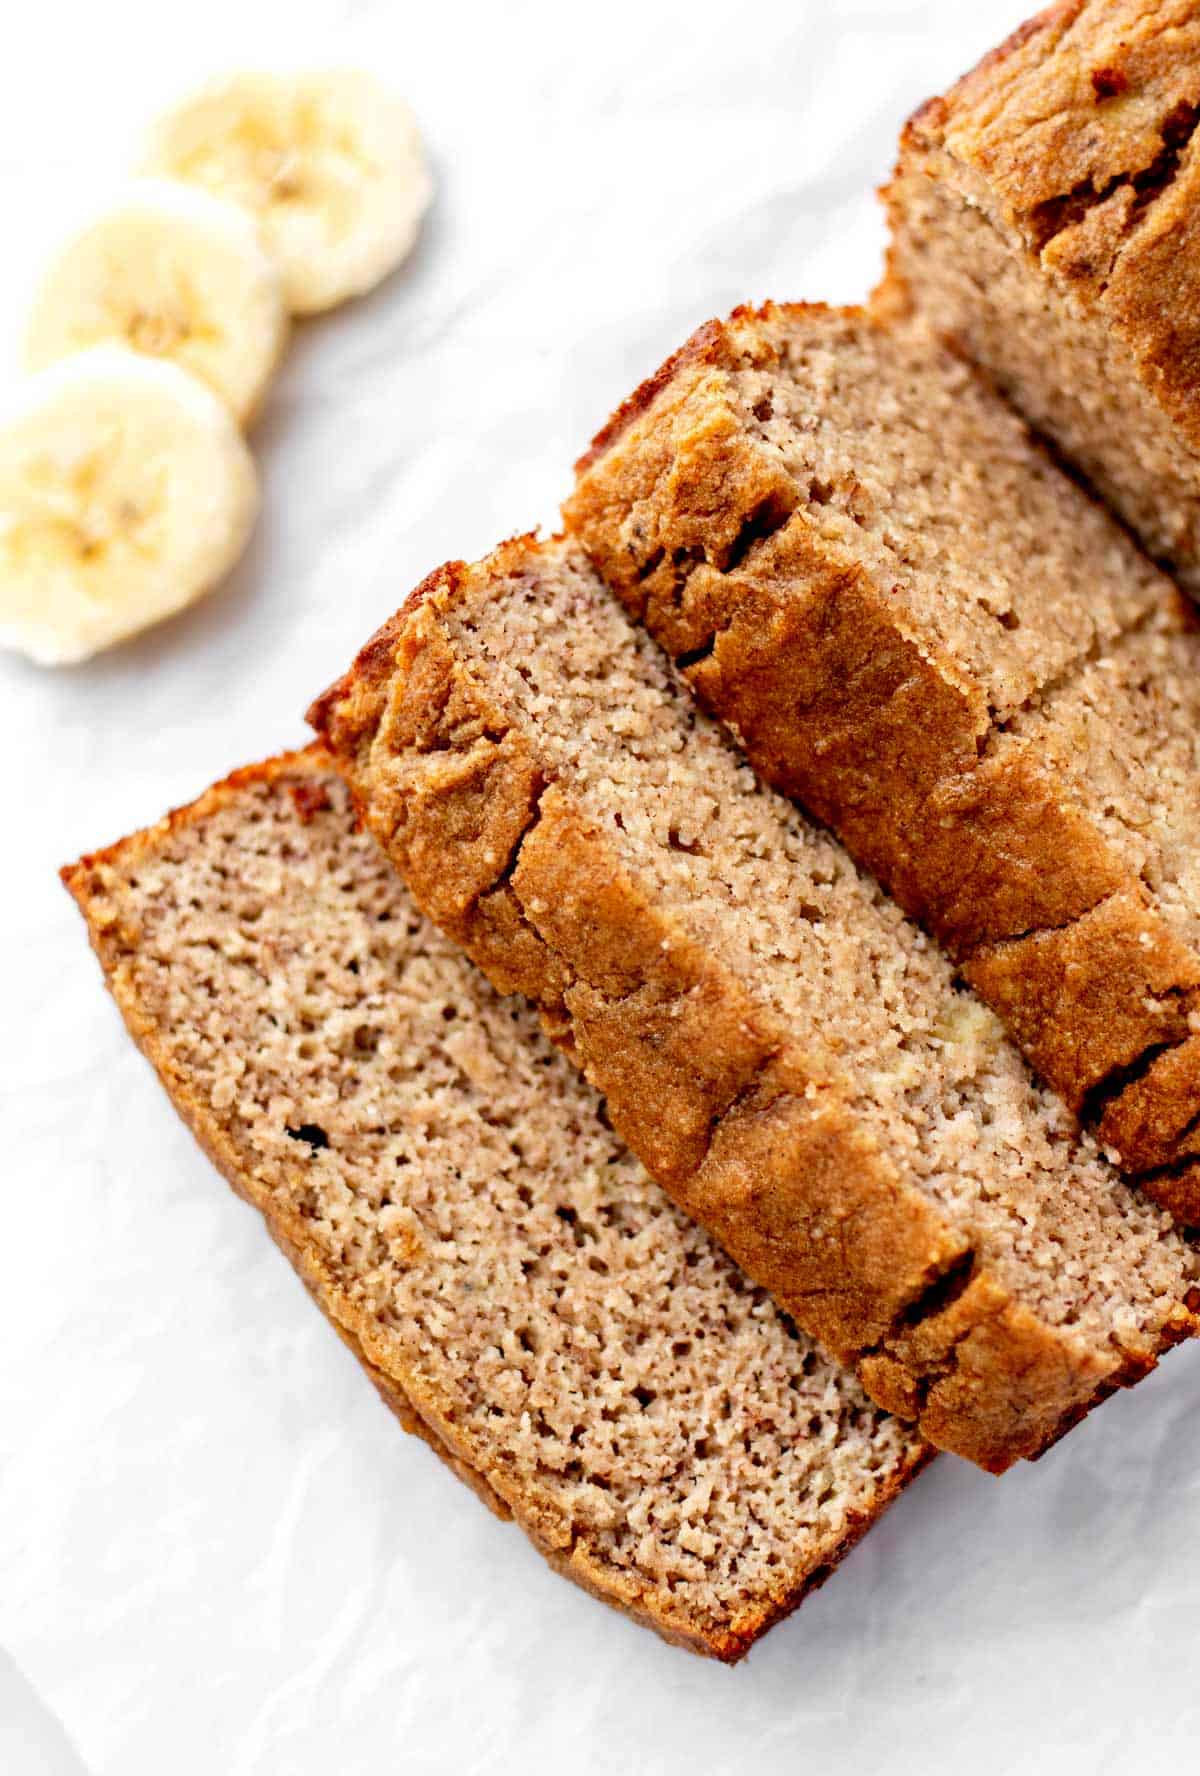 Up close image of slices of baby banana bread.